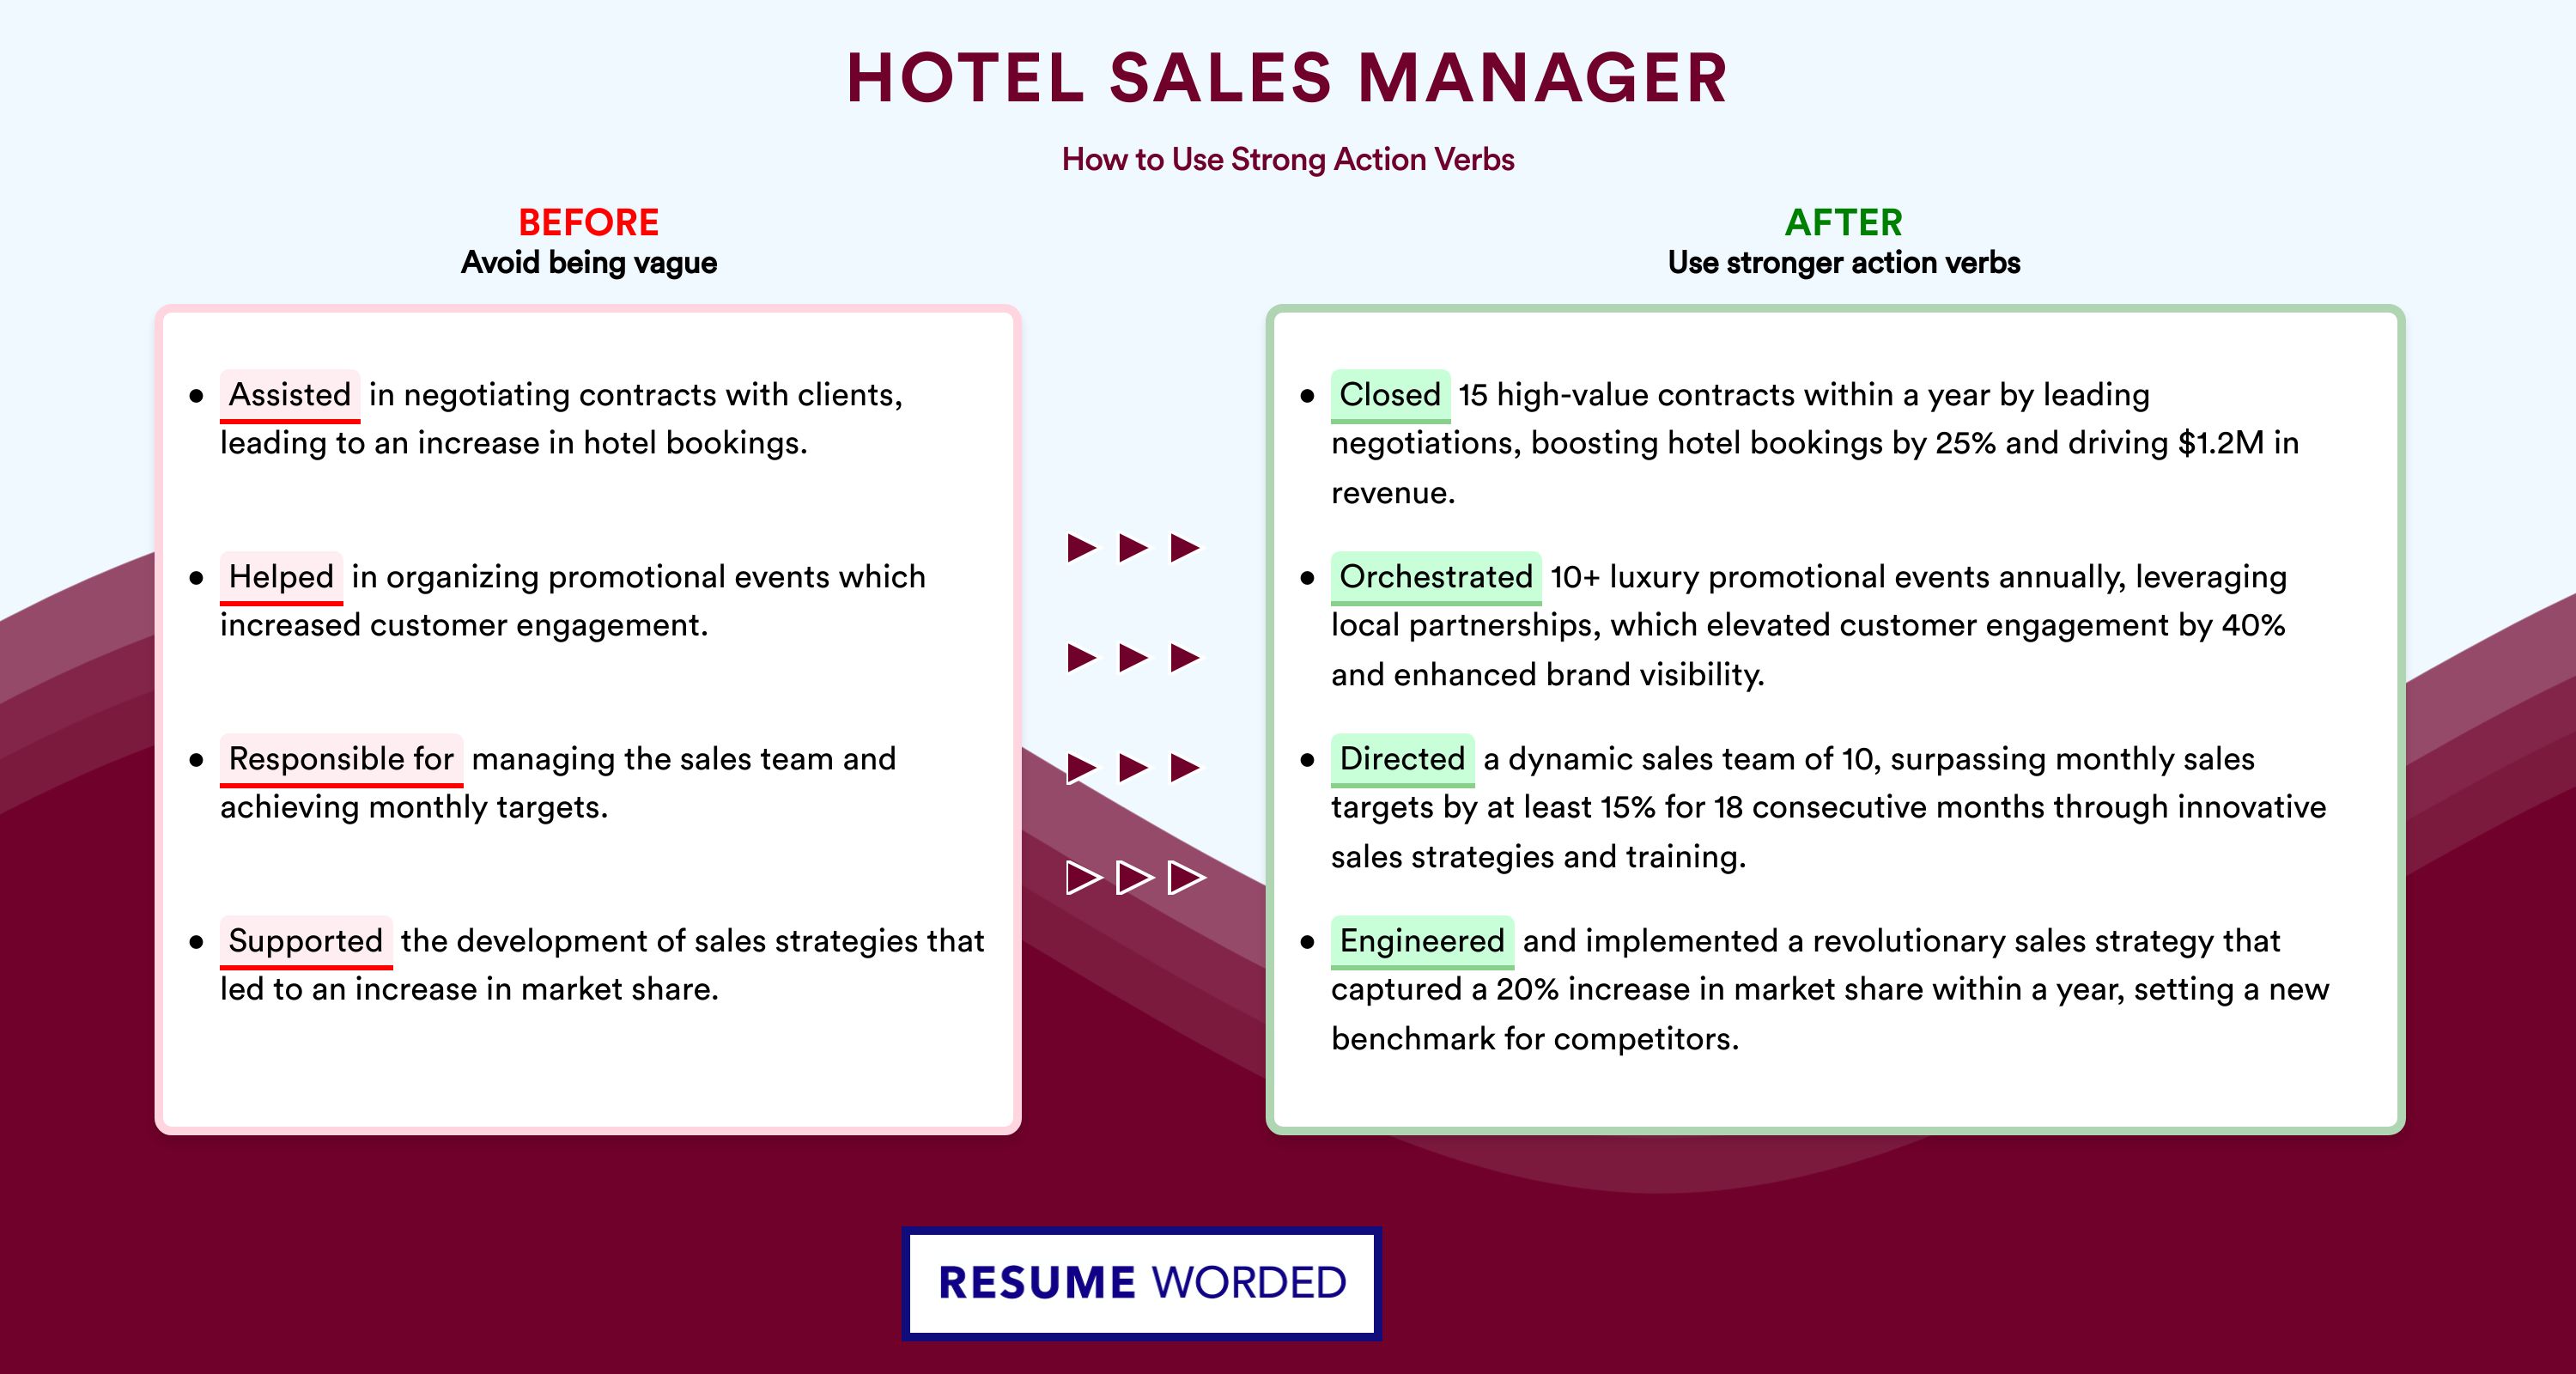 Action Verbs for Hotel Sales Manager